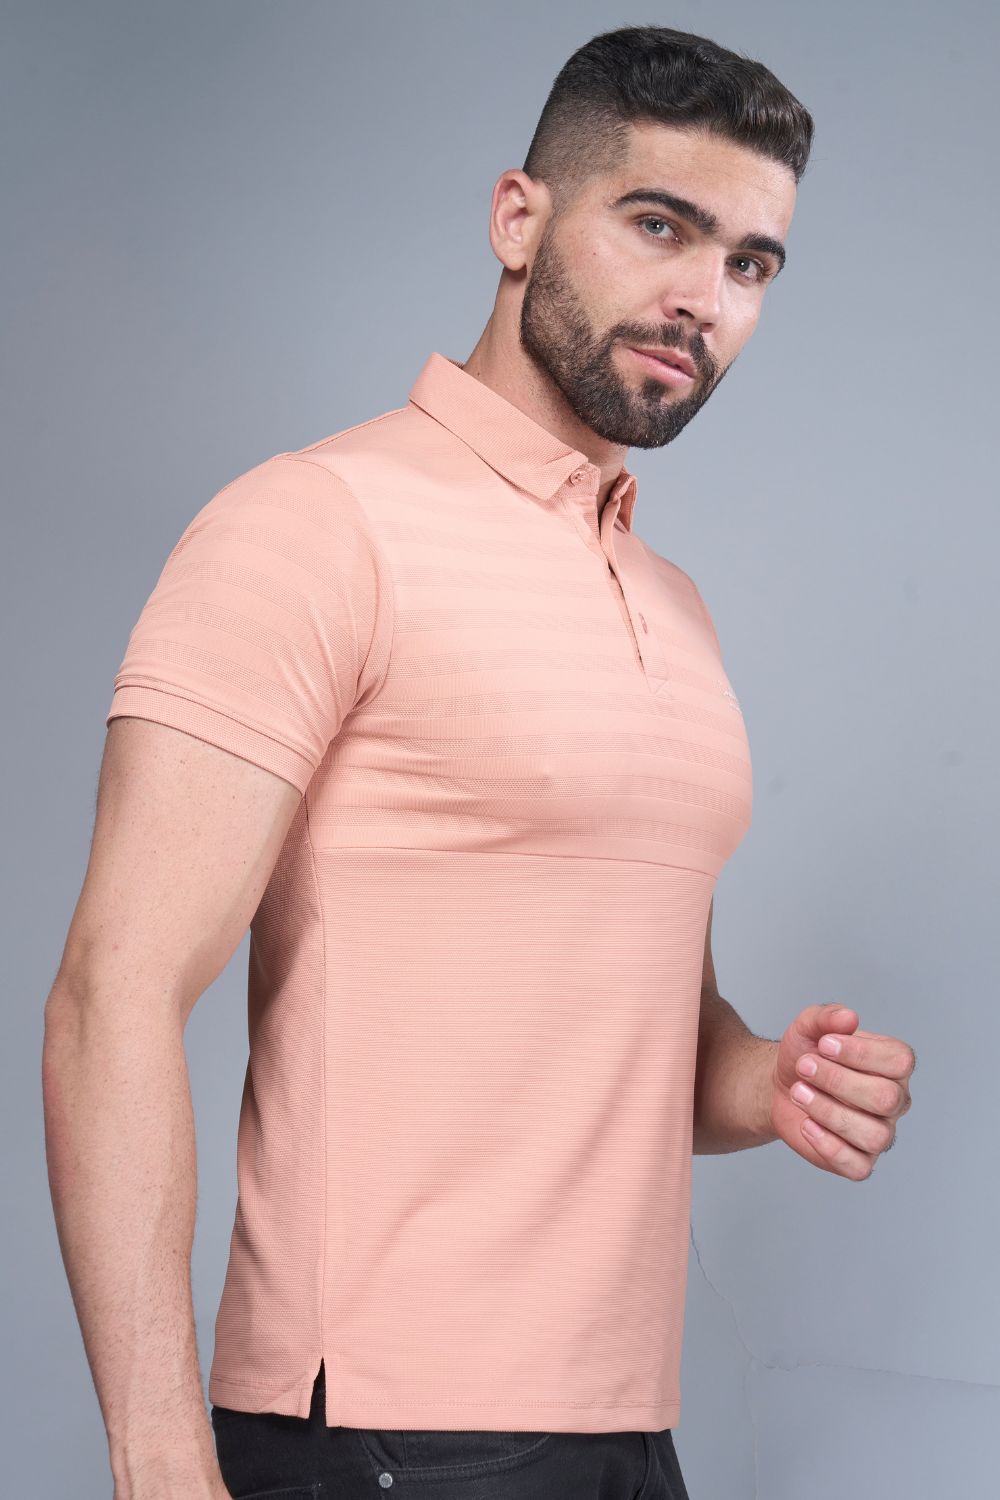 Cafe cream colored, constructed polo T shirt for men with half sleeves and collar, side view.